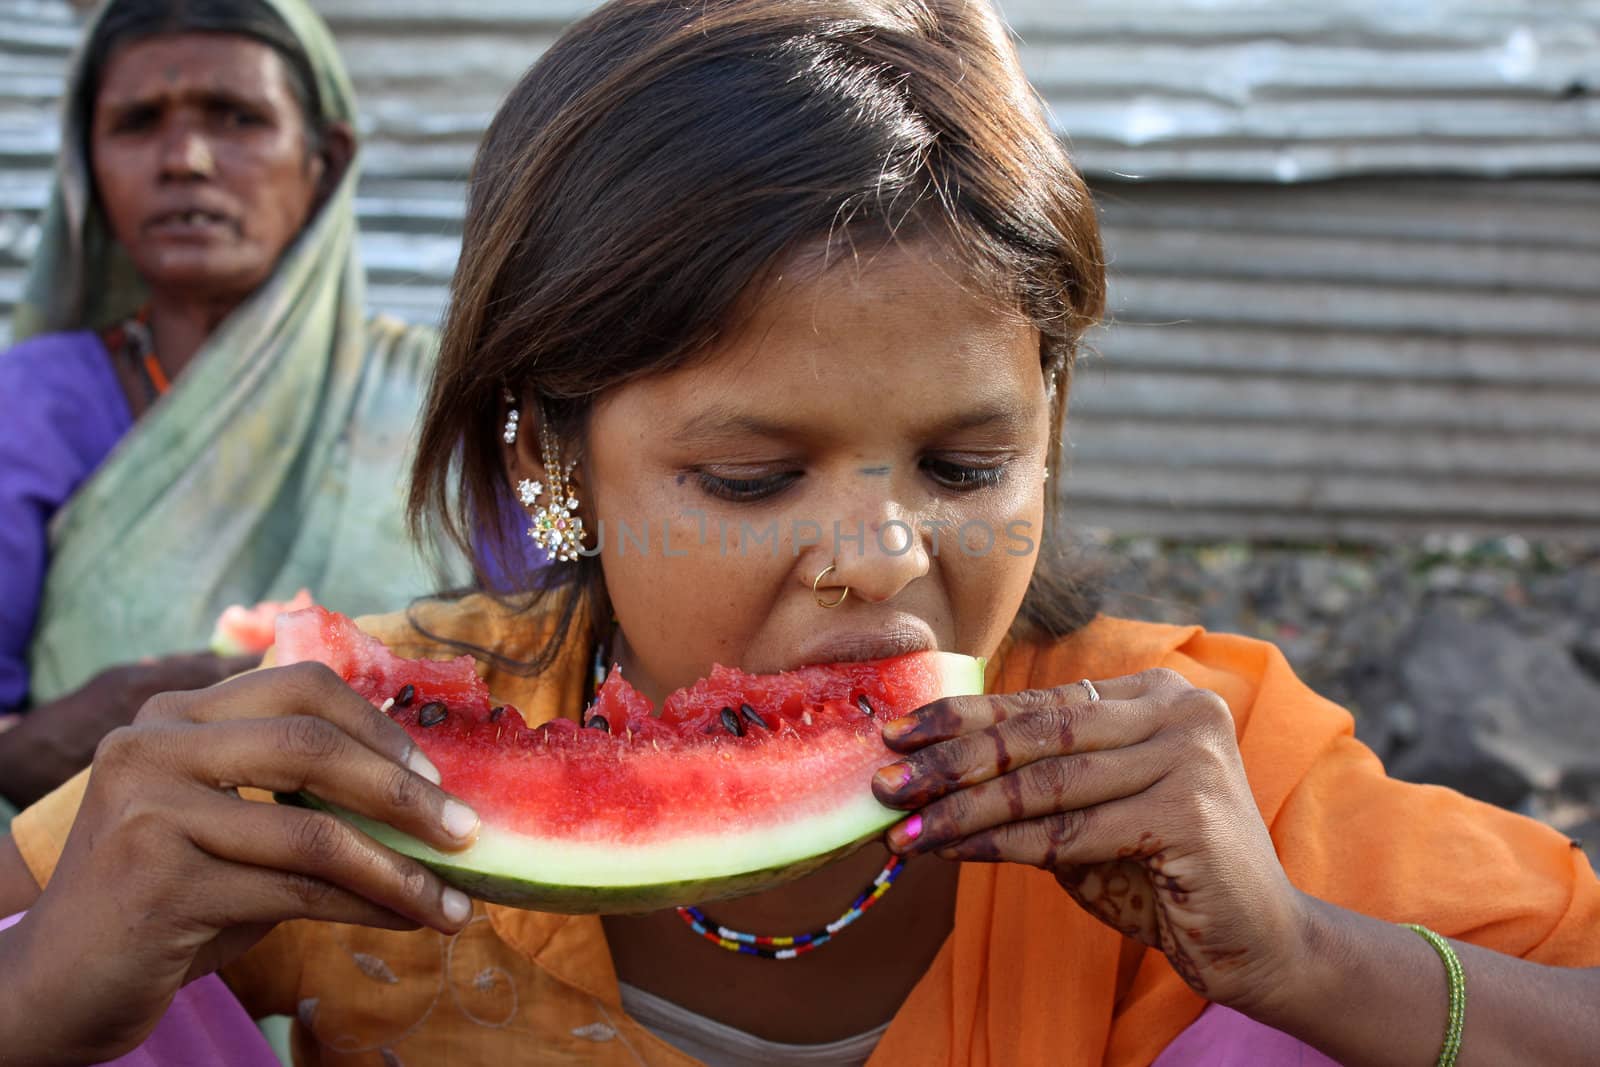 A poor beggar teenage girl in the Indian slums eating a fresh watermelon.